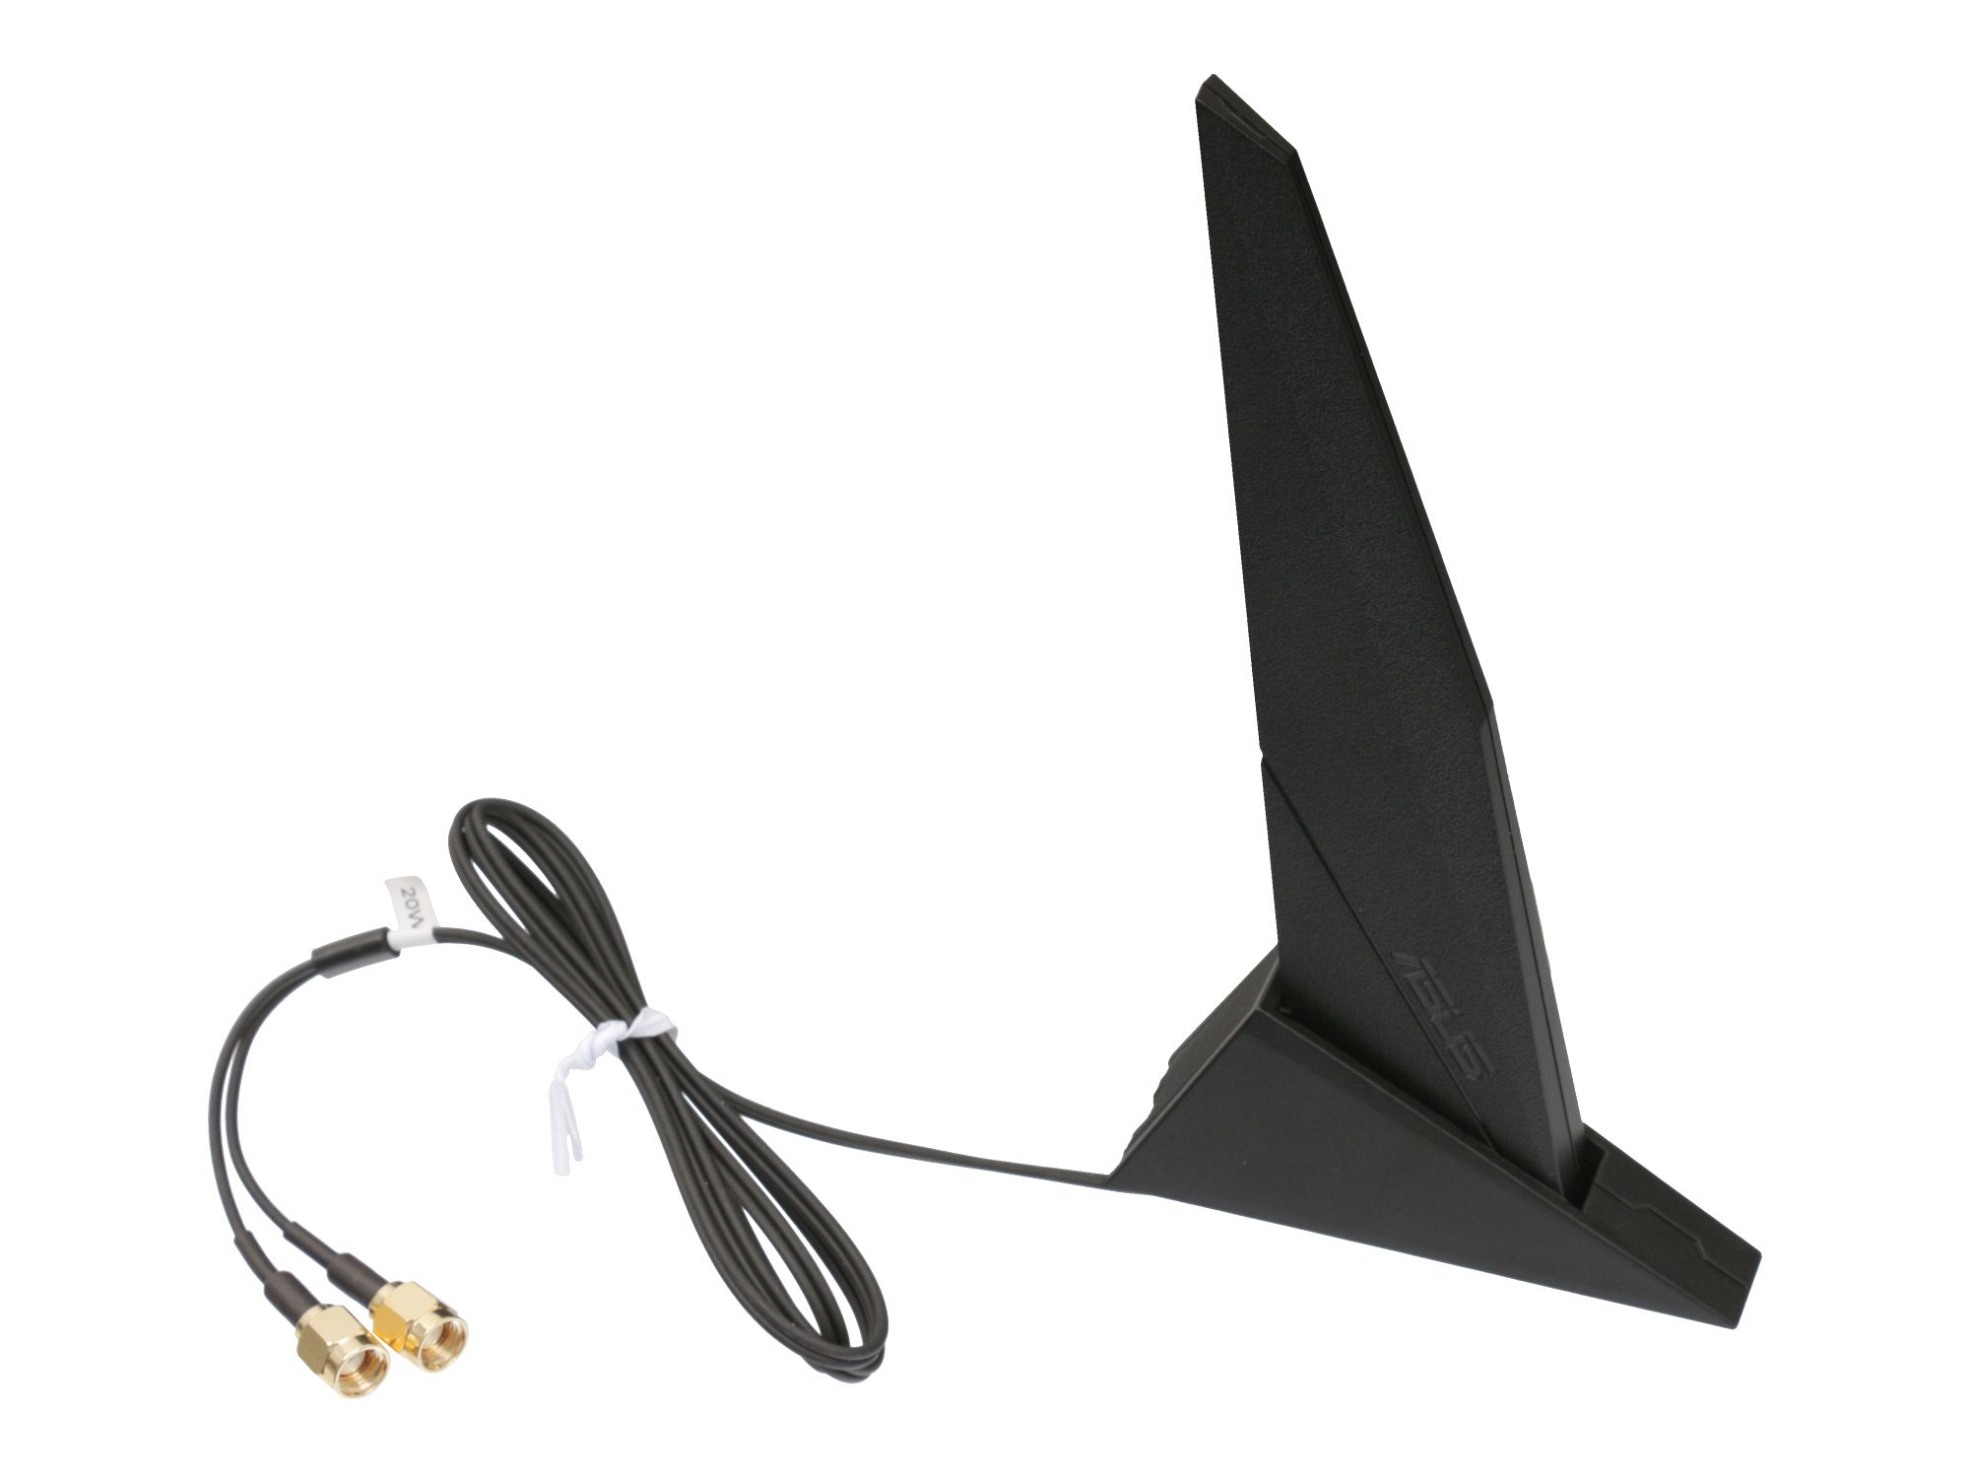 Externe Asus RP-SMA DIPOLE Antenne für Asus ROG MAXIMUS XII HERO (WI-FI)